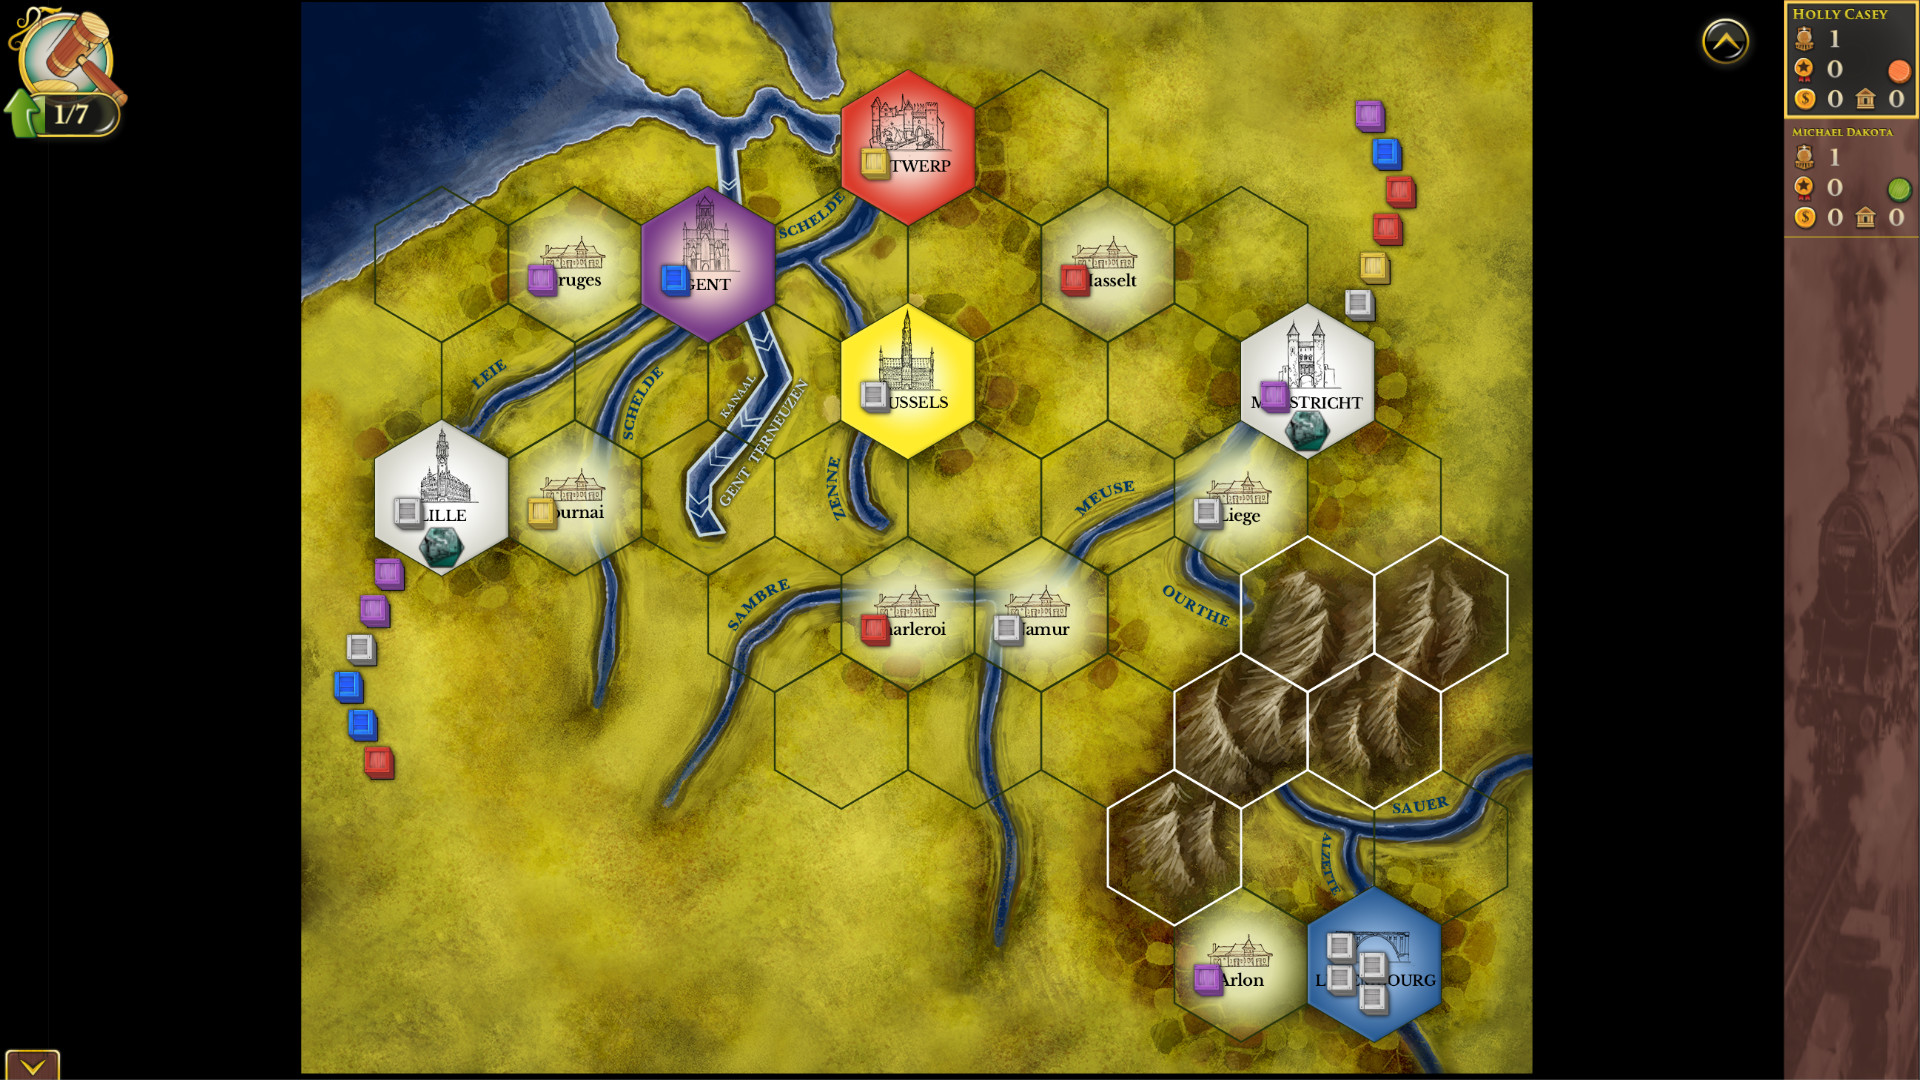 Steam: Rails to Riches - Belgium & Luxembourg Map Featured Screenshot #1